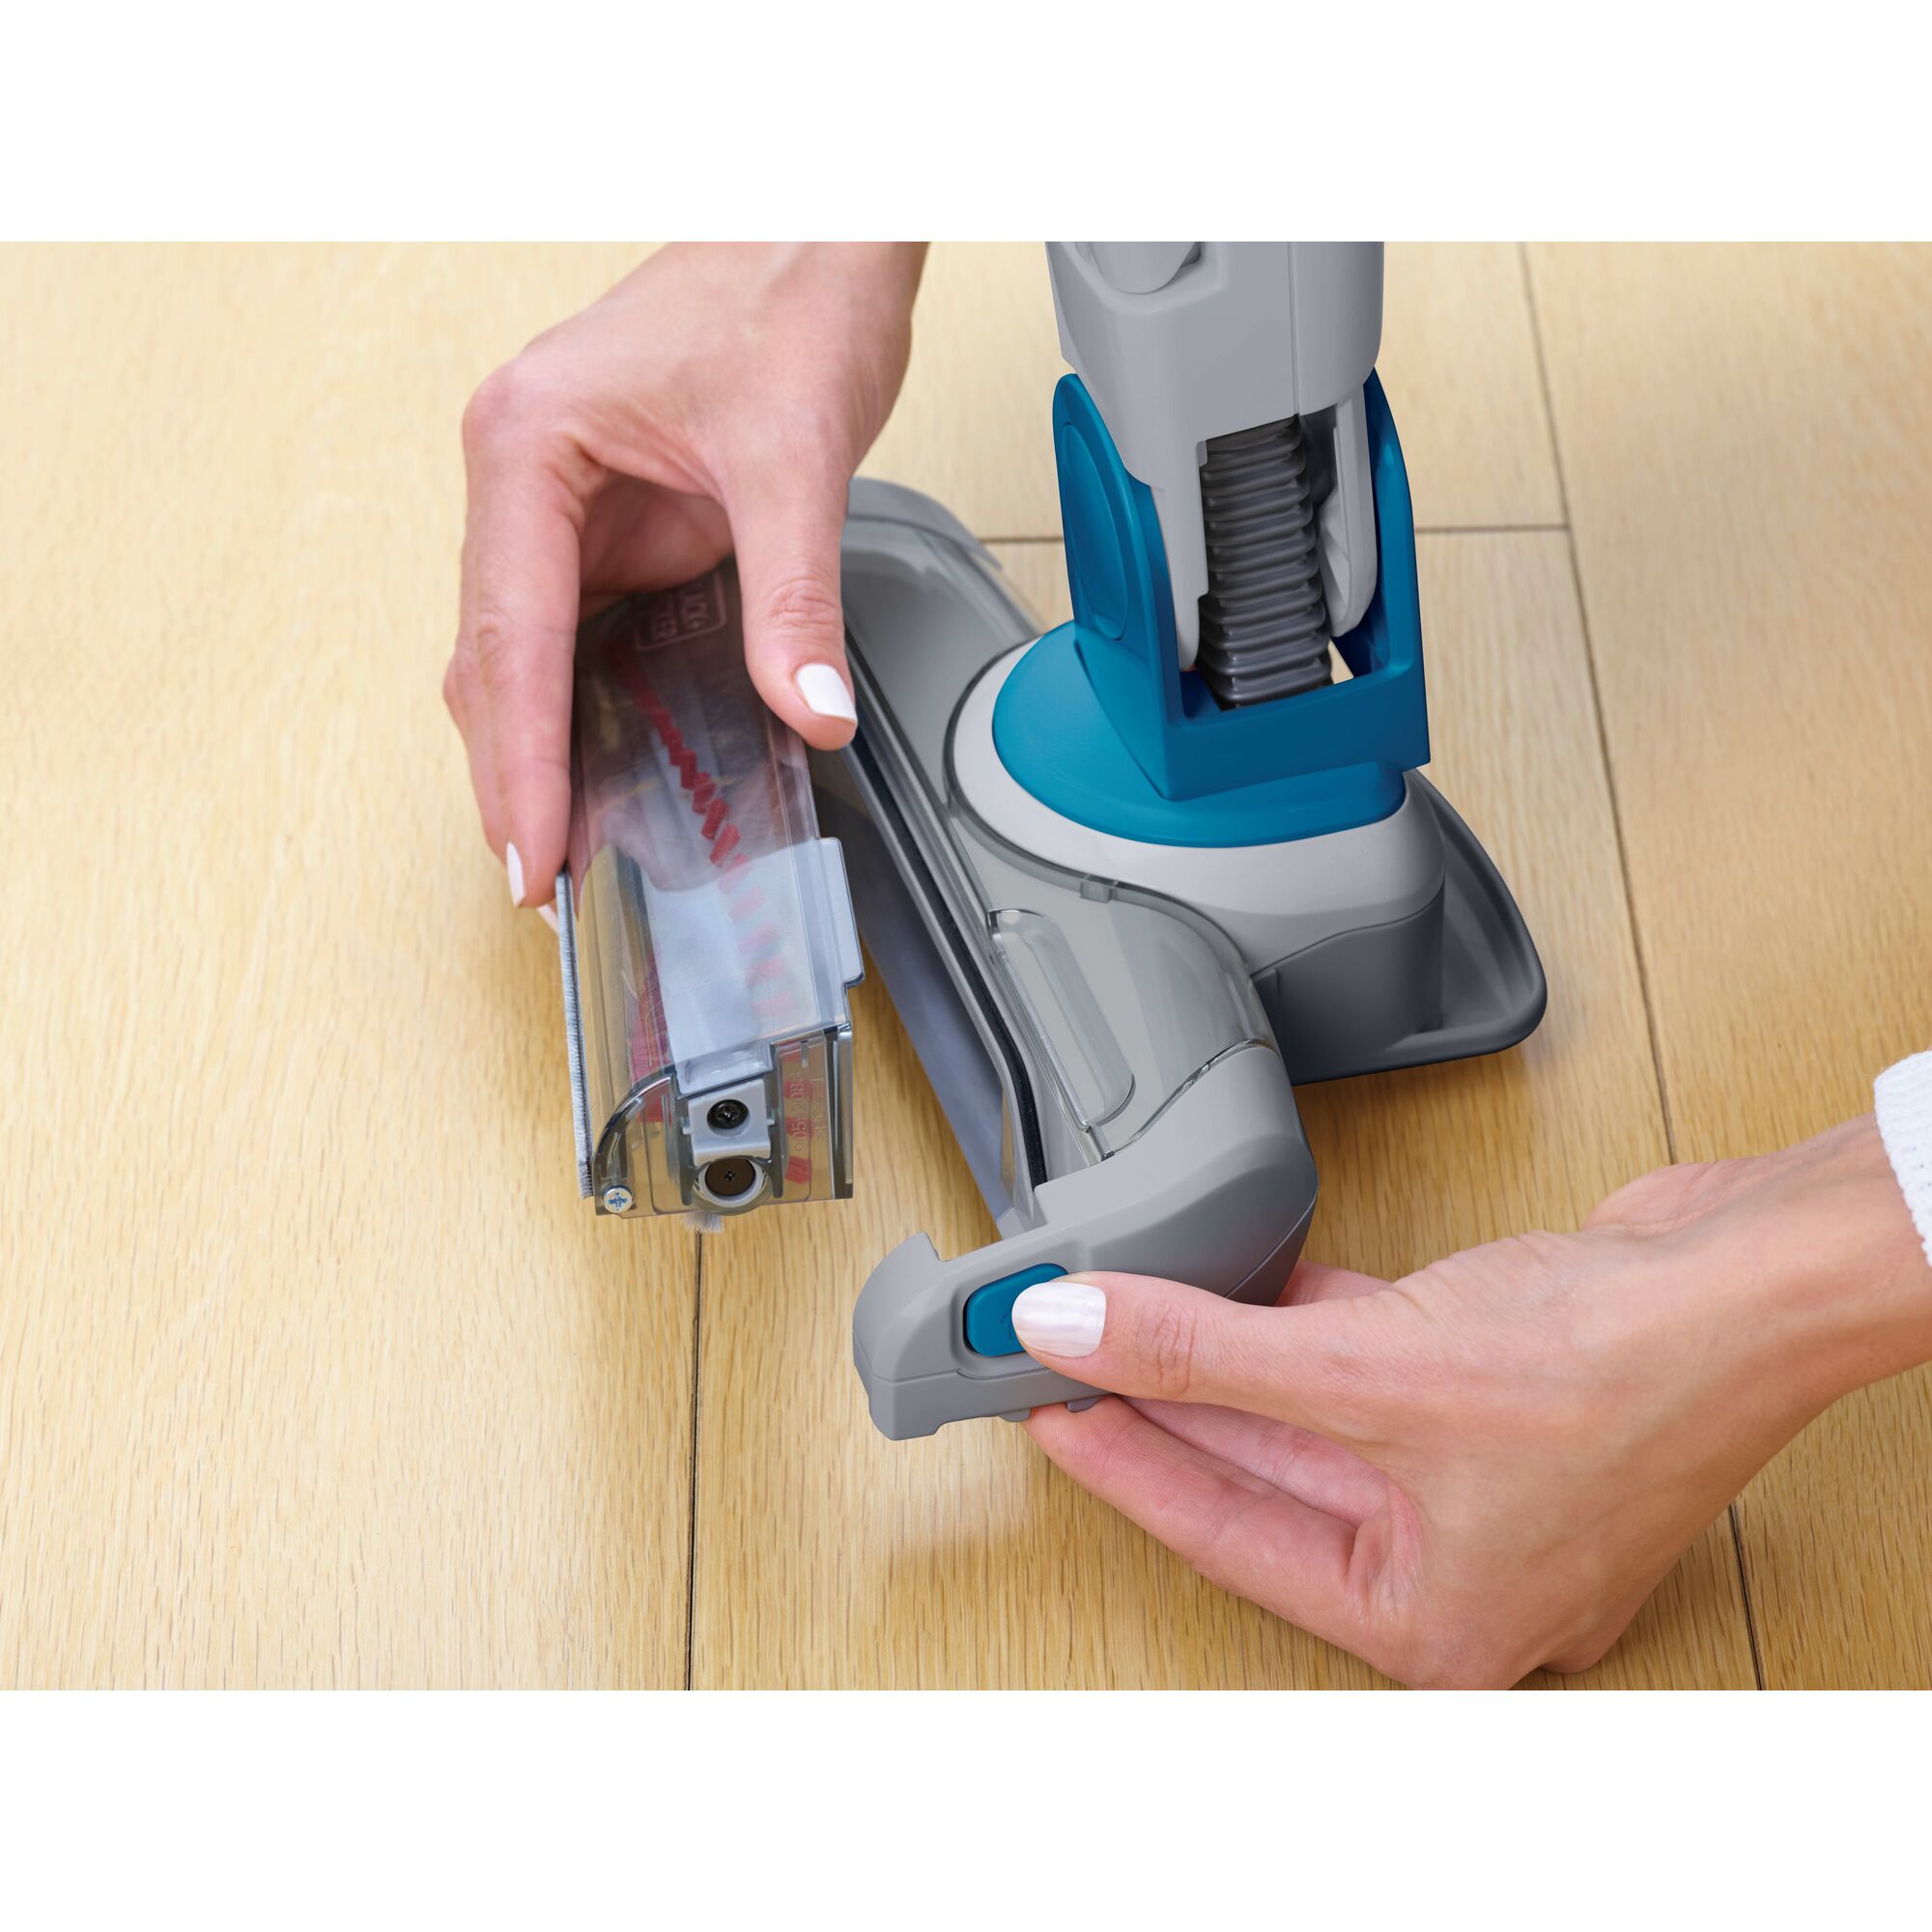 Cordless Lithium 2 in 1 Stick Vacuum Brush Attachment being connected.